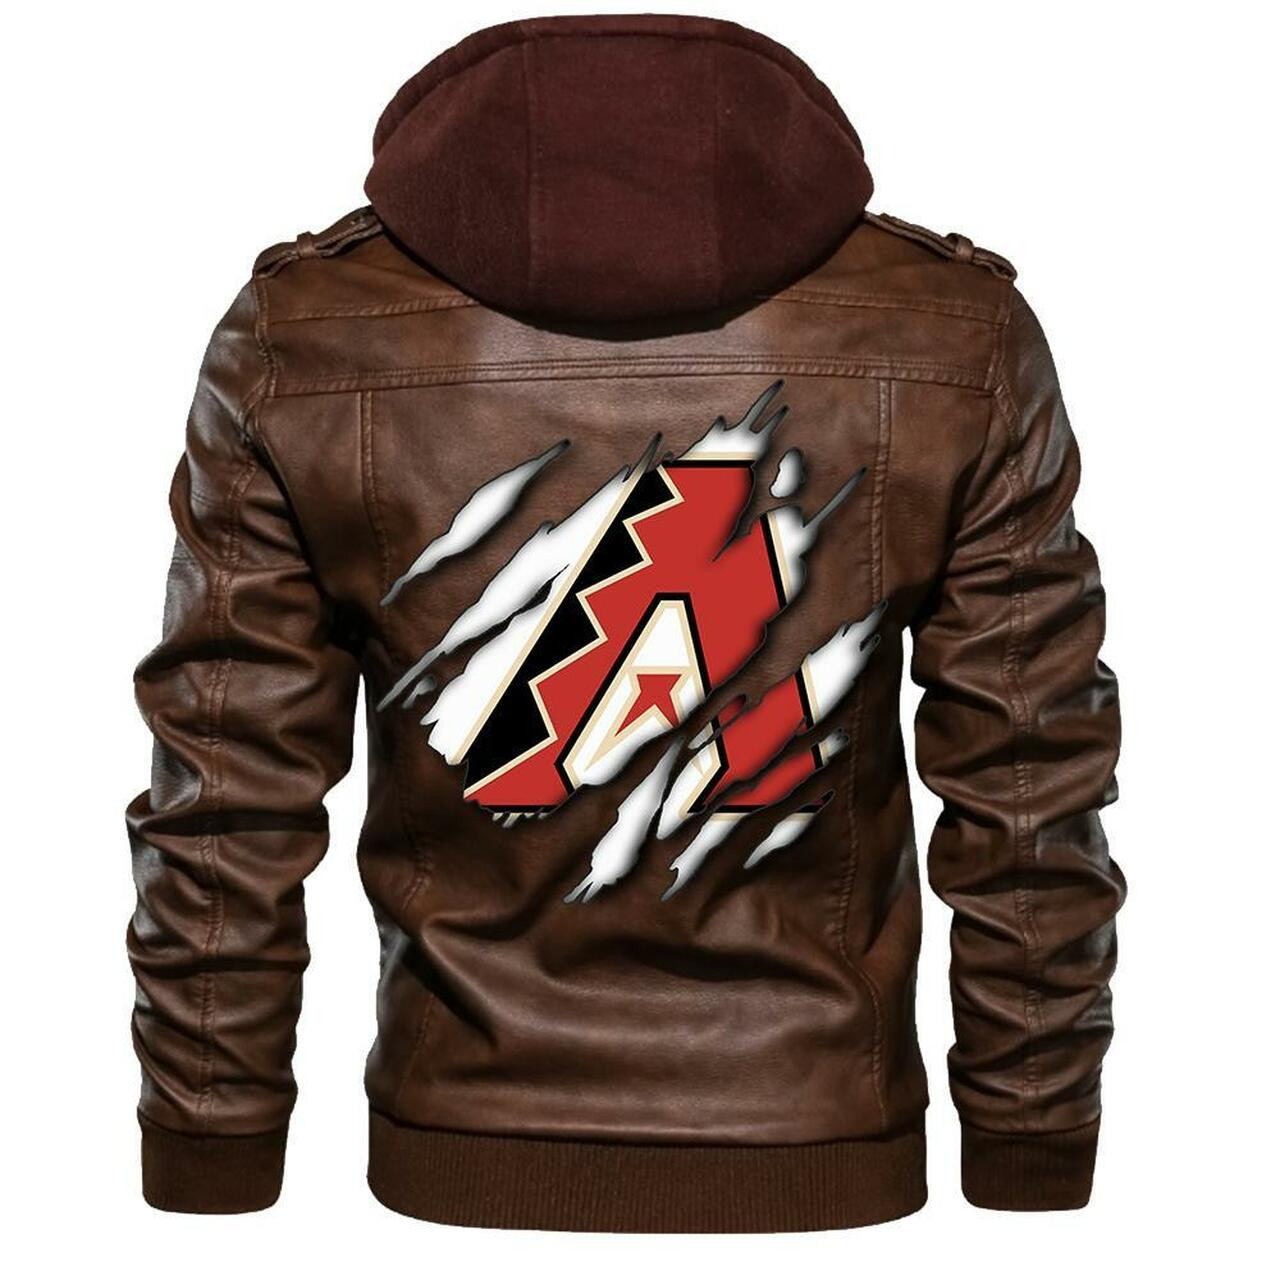 You can find a good leather jacket by access our website 20